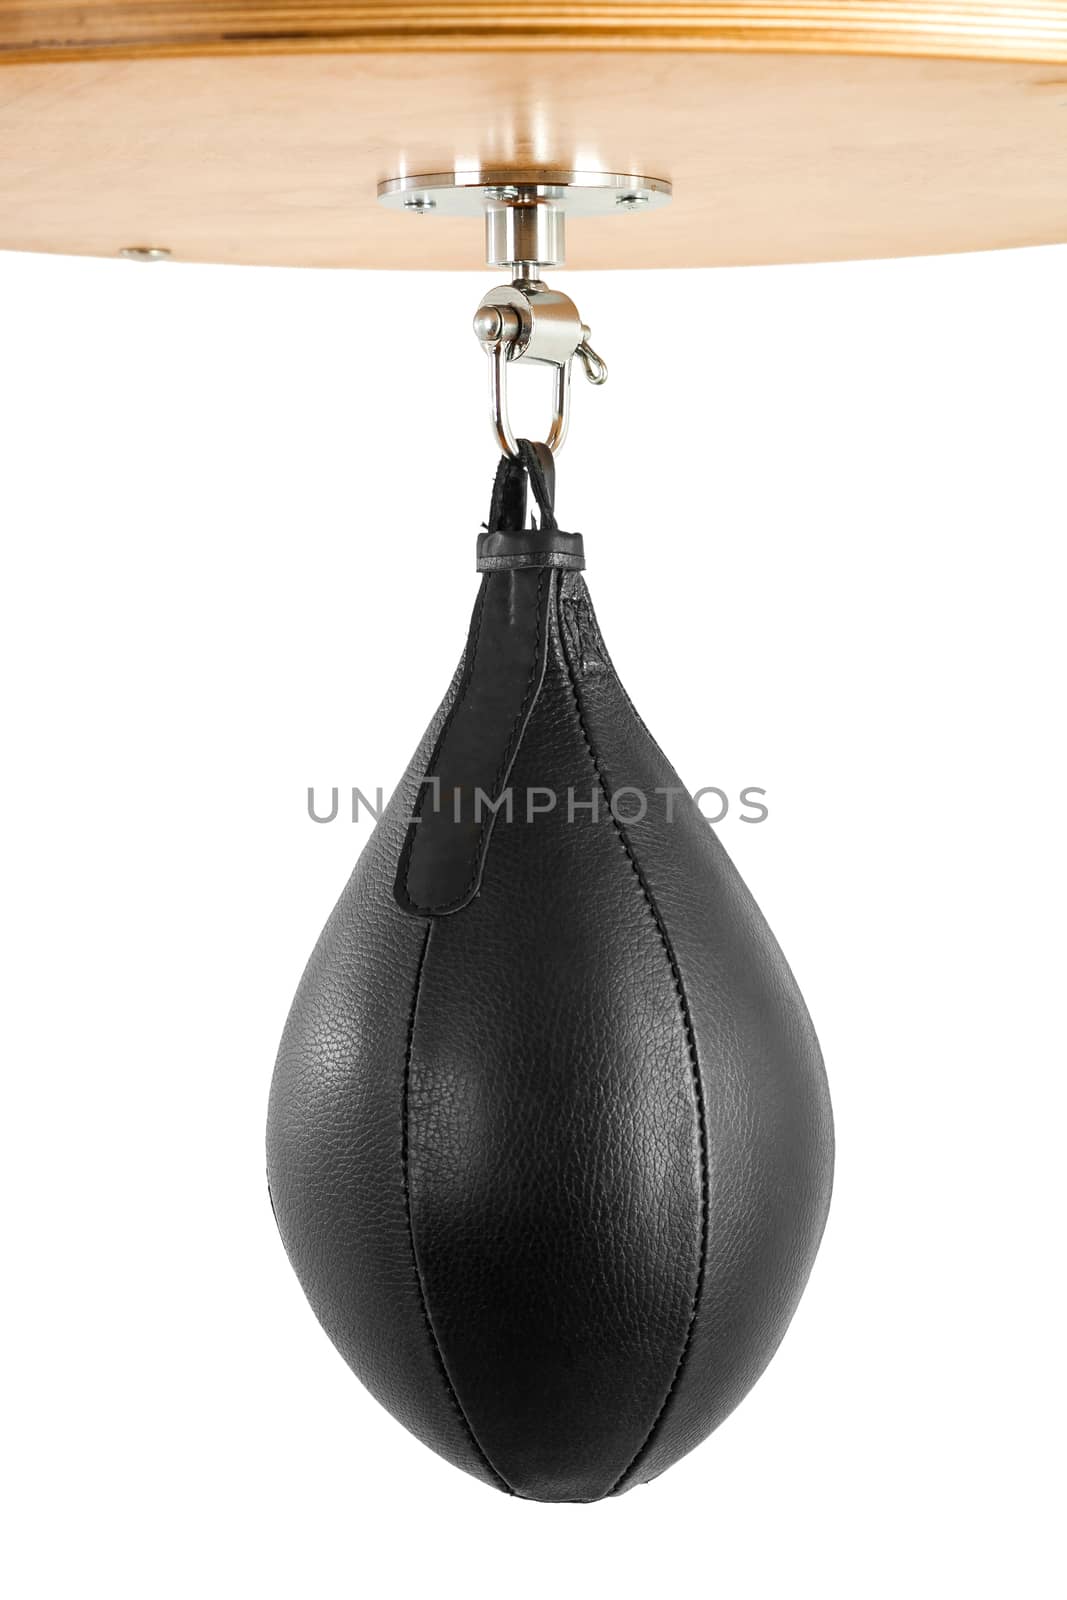 Boxing pear hanging by sveter